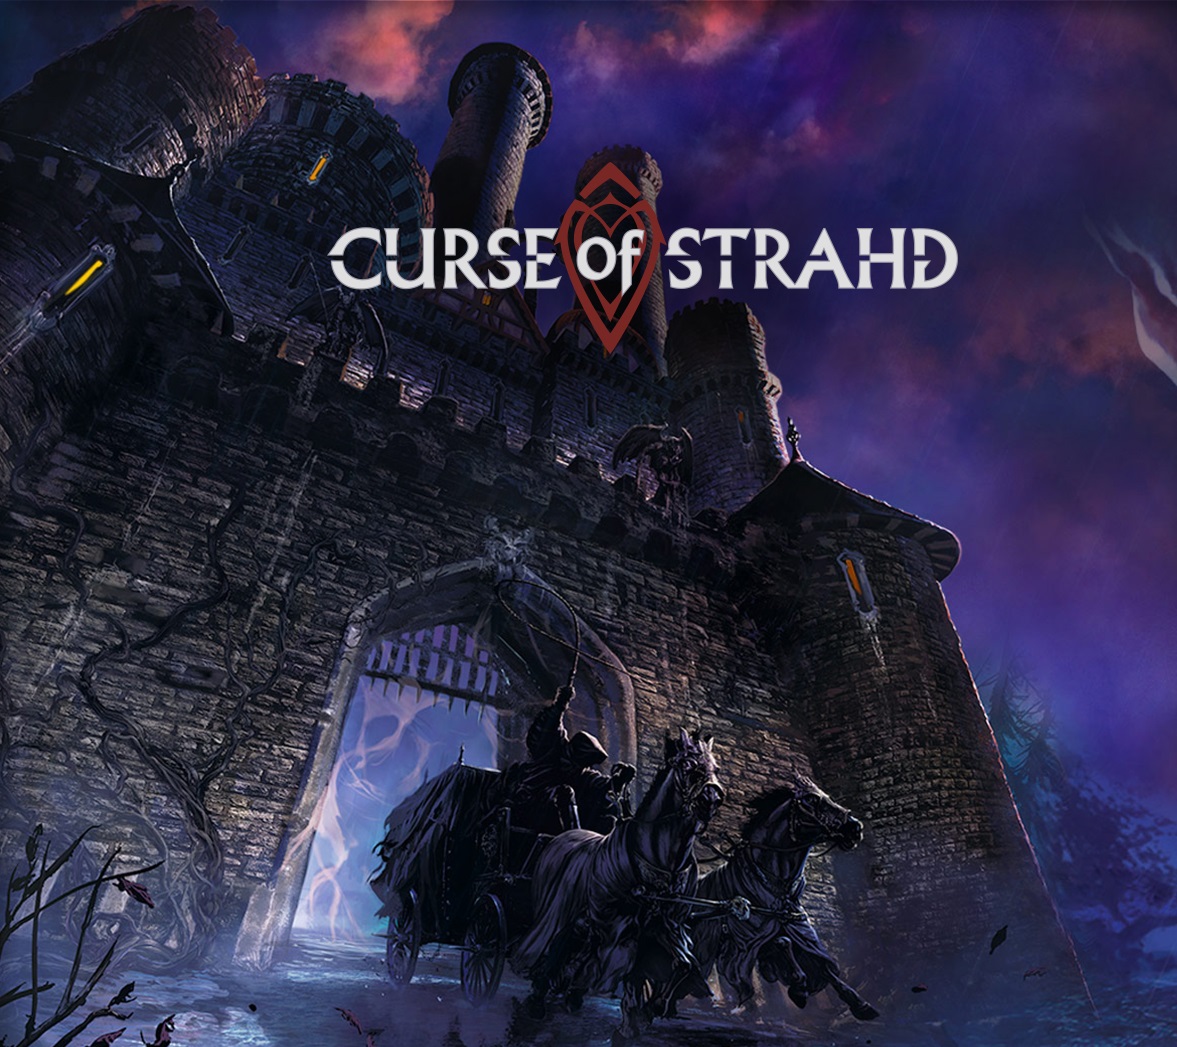 Curse of Strahd  Attack of the Dead  Well Met Adventurers